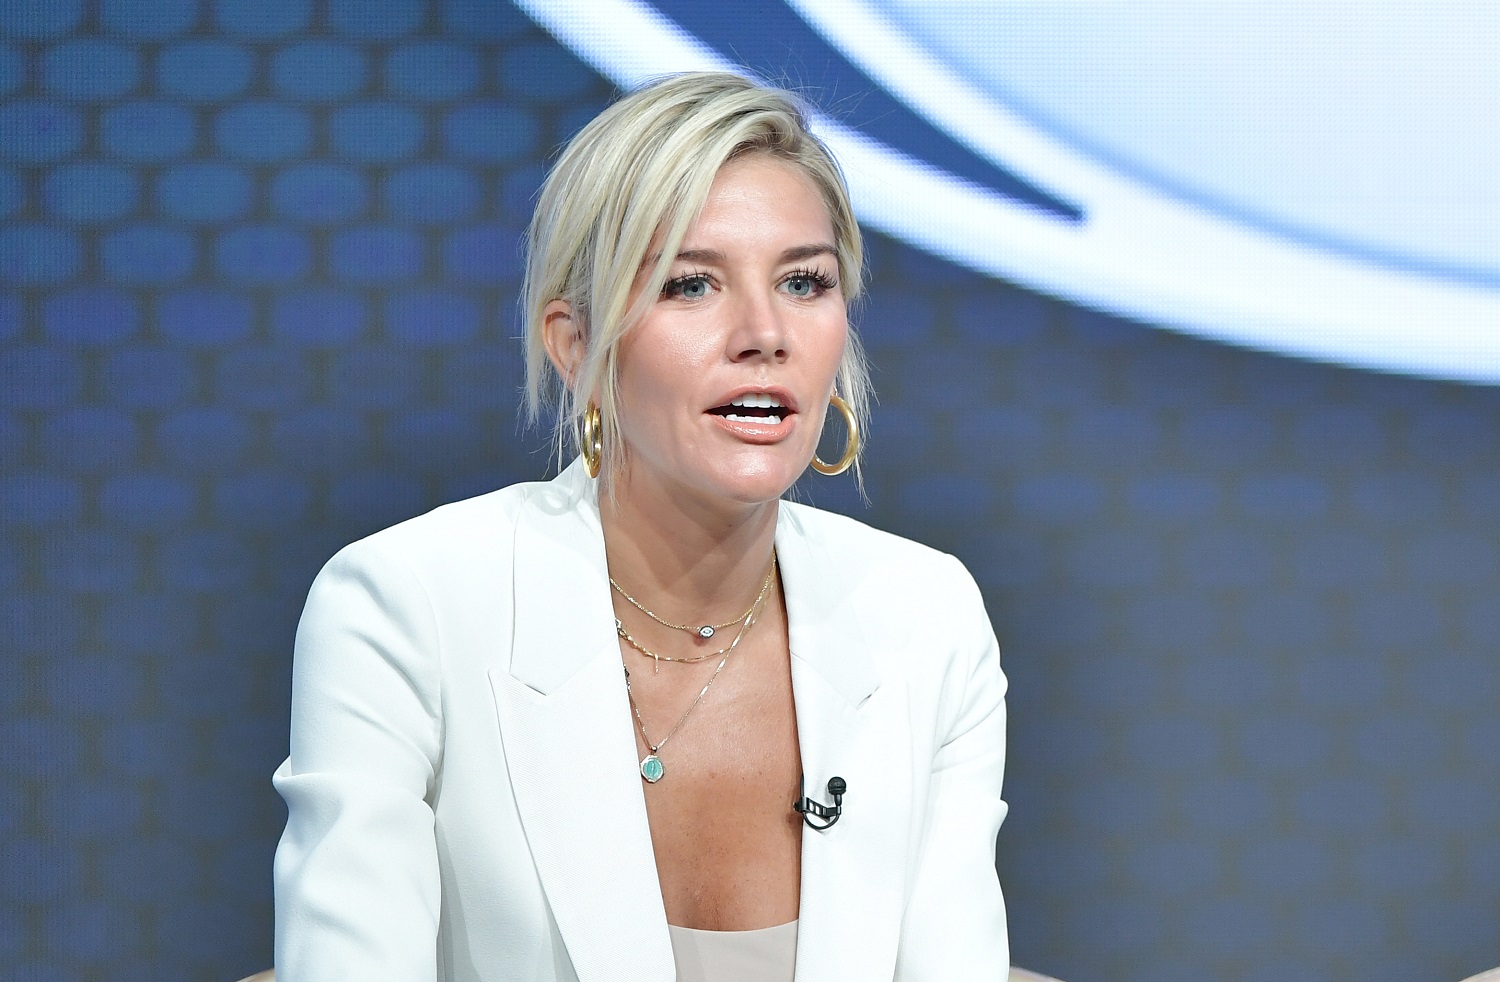 Charissa Thompson was one of the first hires when Fox Sports launched two new cable networks in 2013.